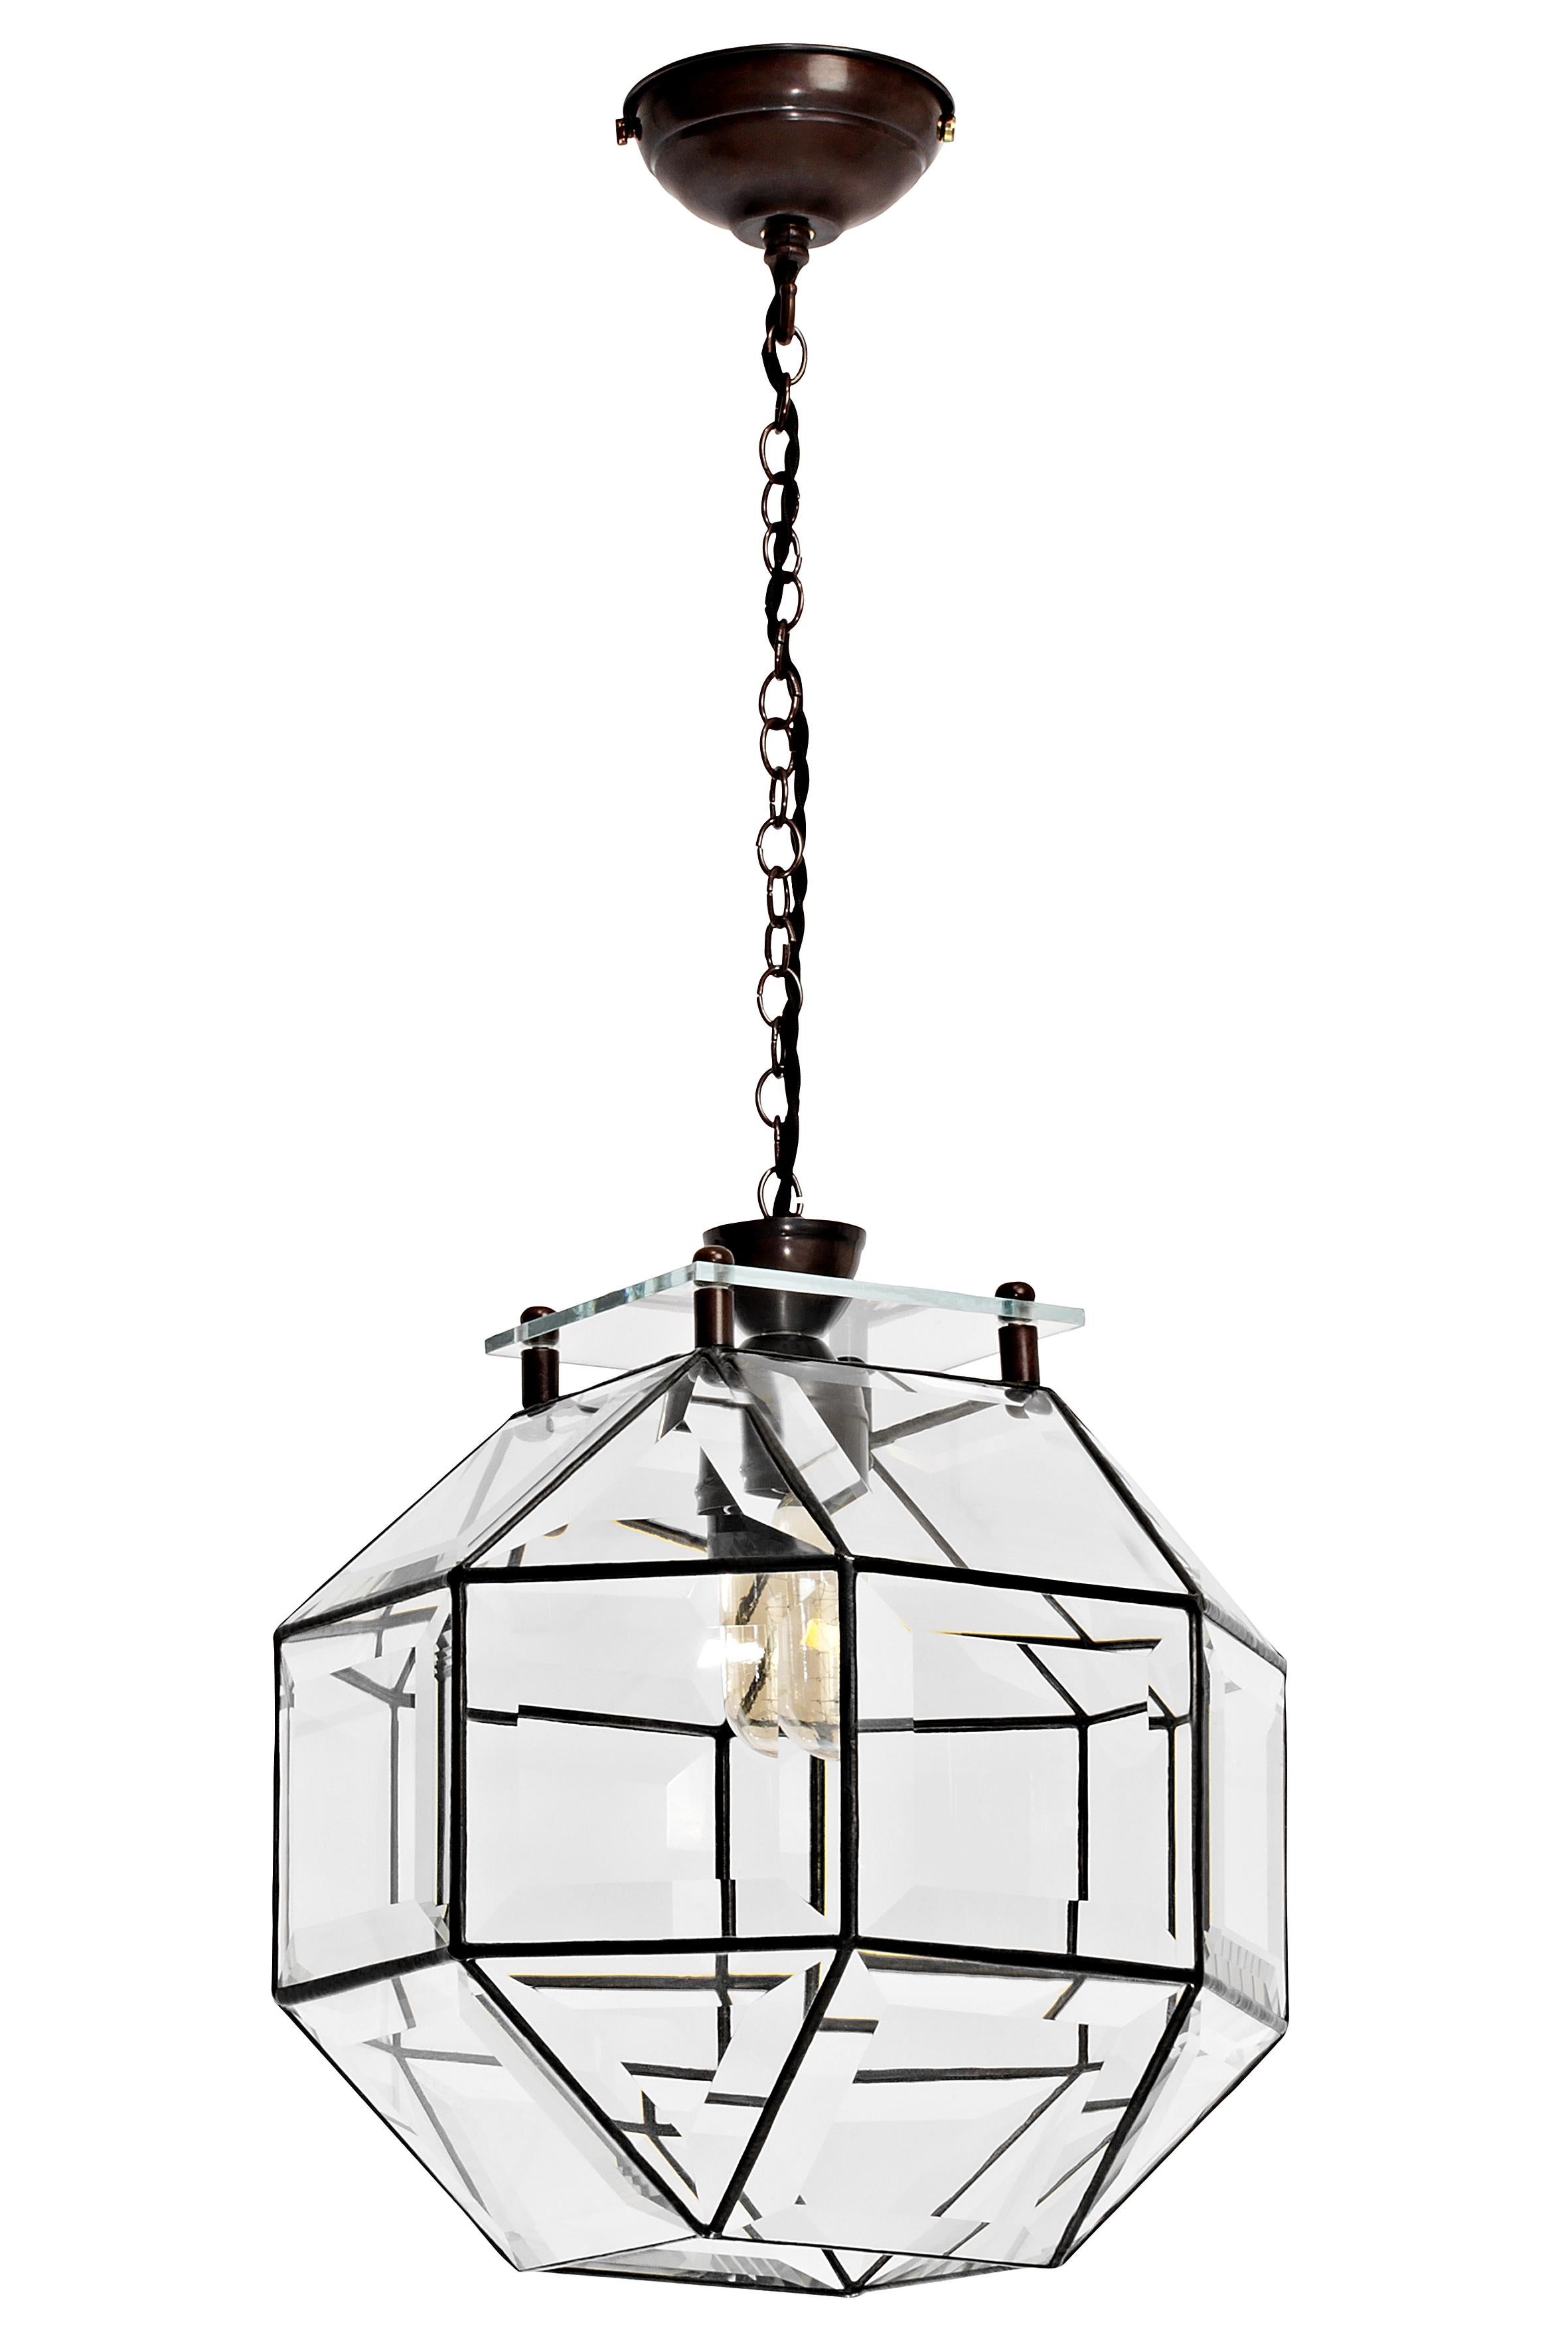 Paragon pendant by CTO Lighting
Materials: bronze with bevelled glass and bronze oval chain
Dimensions: H 30 x W 30 cm 

All our lamps can be wired according to each country. If sold to the USA it will be wired for the USA for instance.
Other